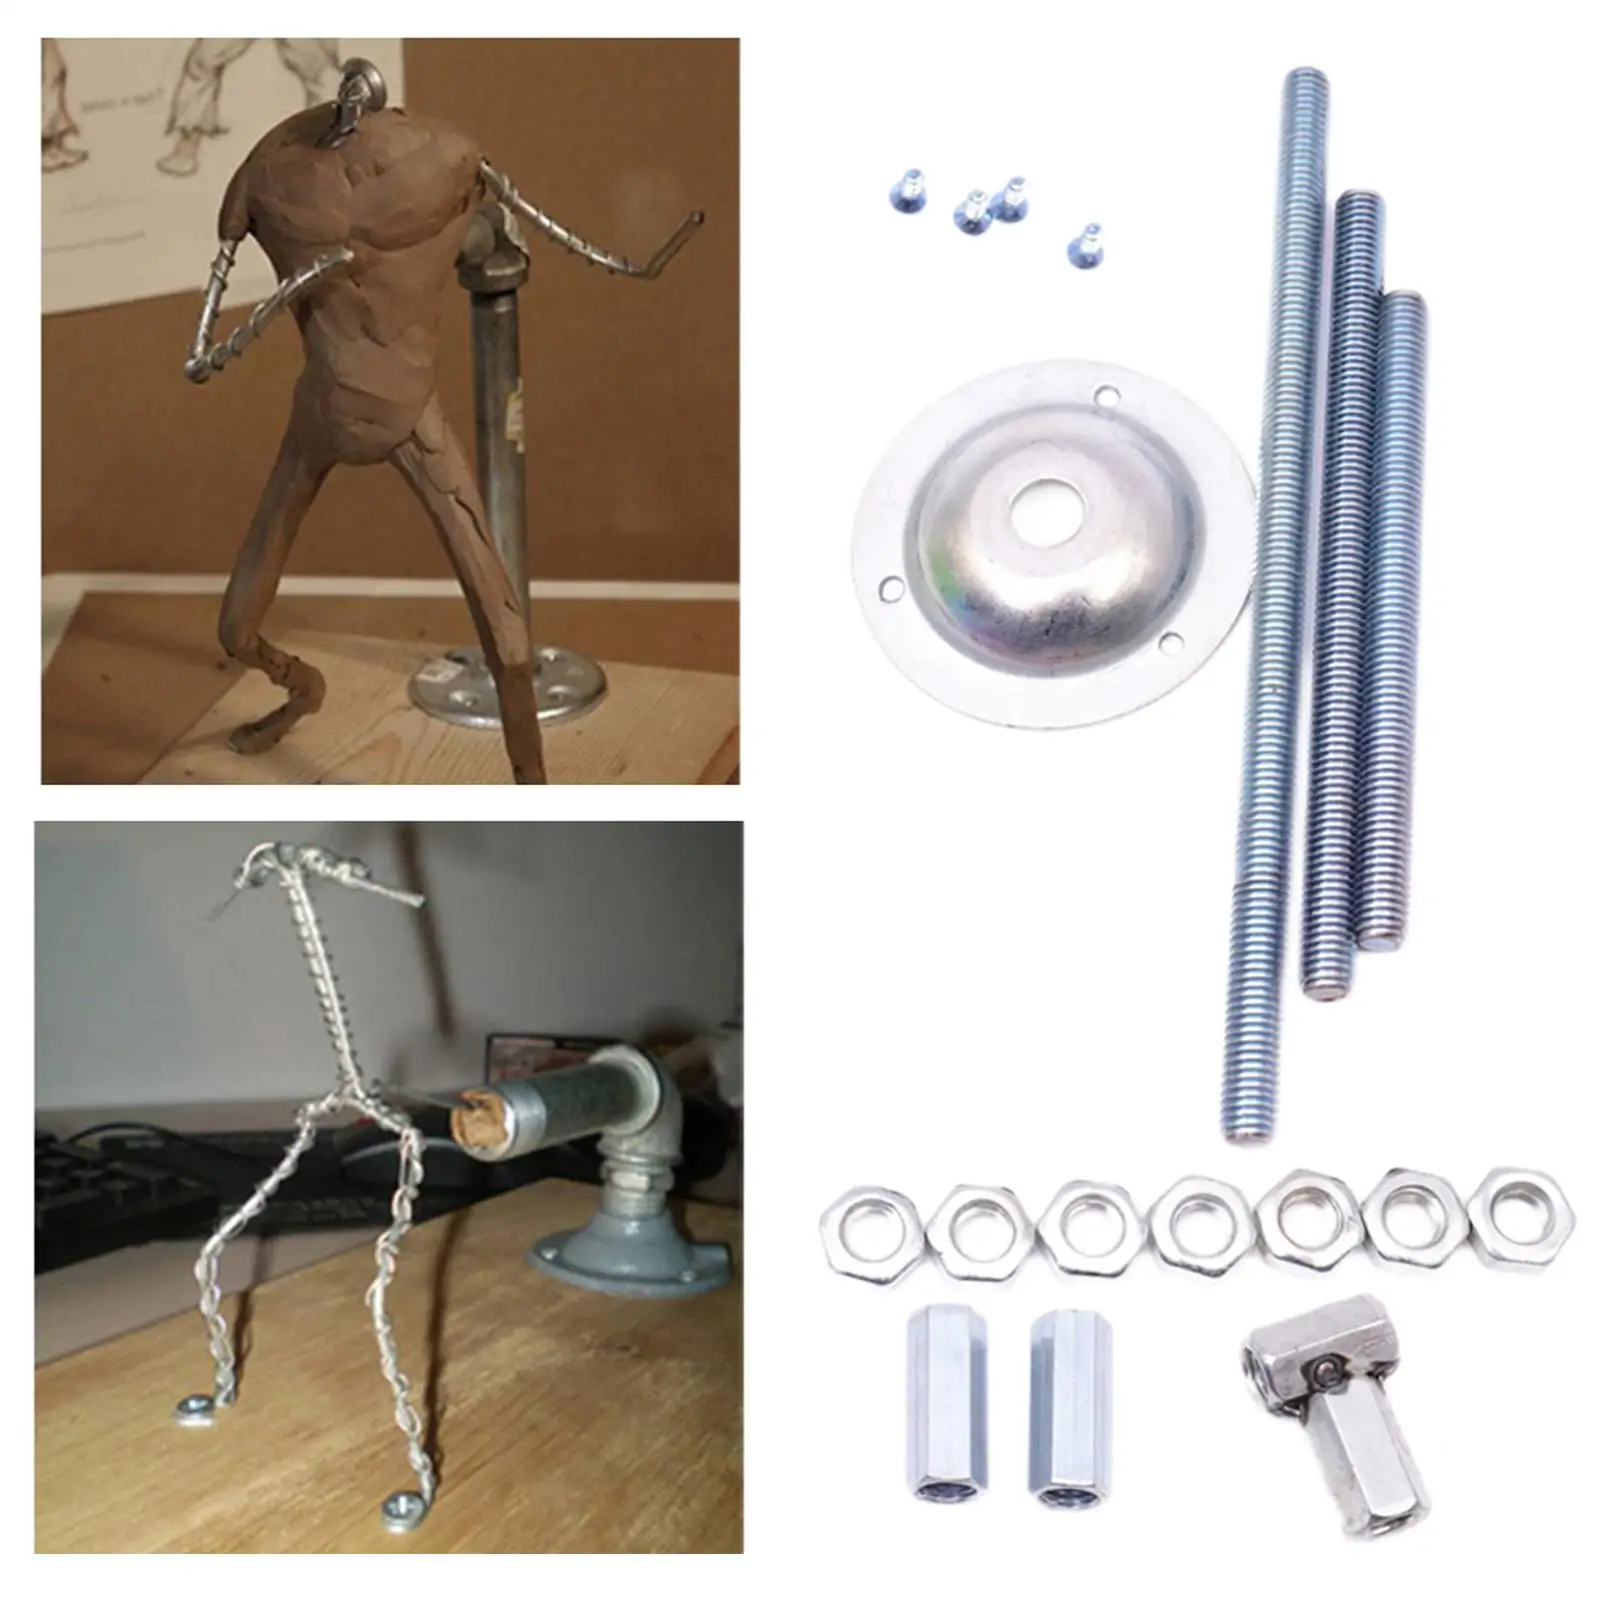 1Set Clay Model Stand Metal Pipe Support Rack DIY Wax Sculpting Carving Modeling Statue Hobby Figure Holder Supplies